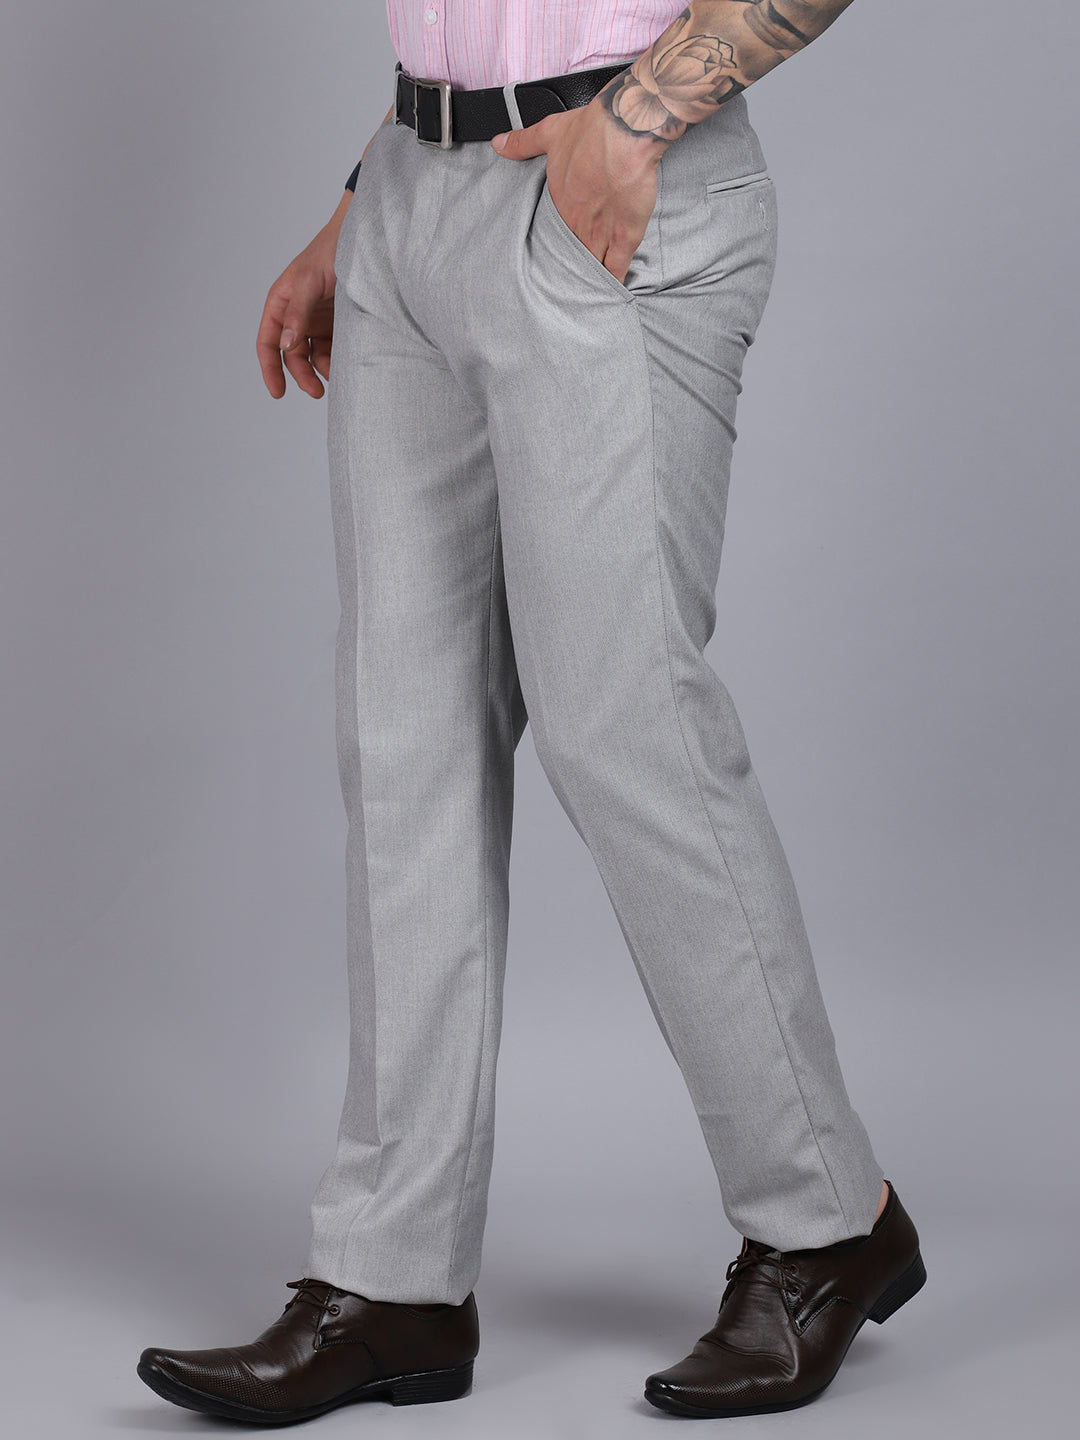 Buy Arrow Hudson Tailored Fit Heathered Formal Trousers - NNNOW.com